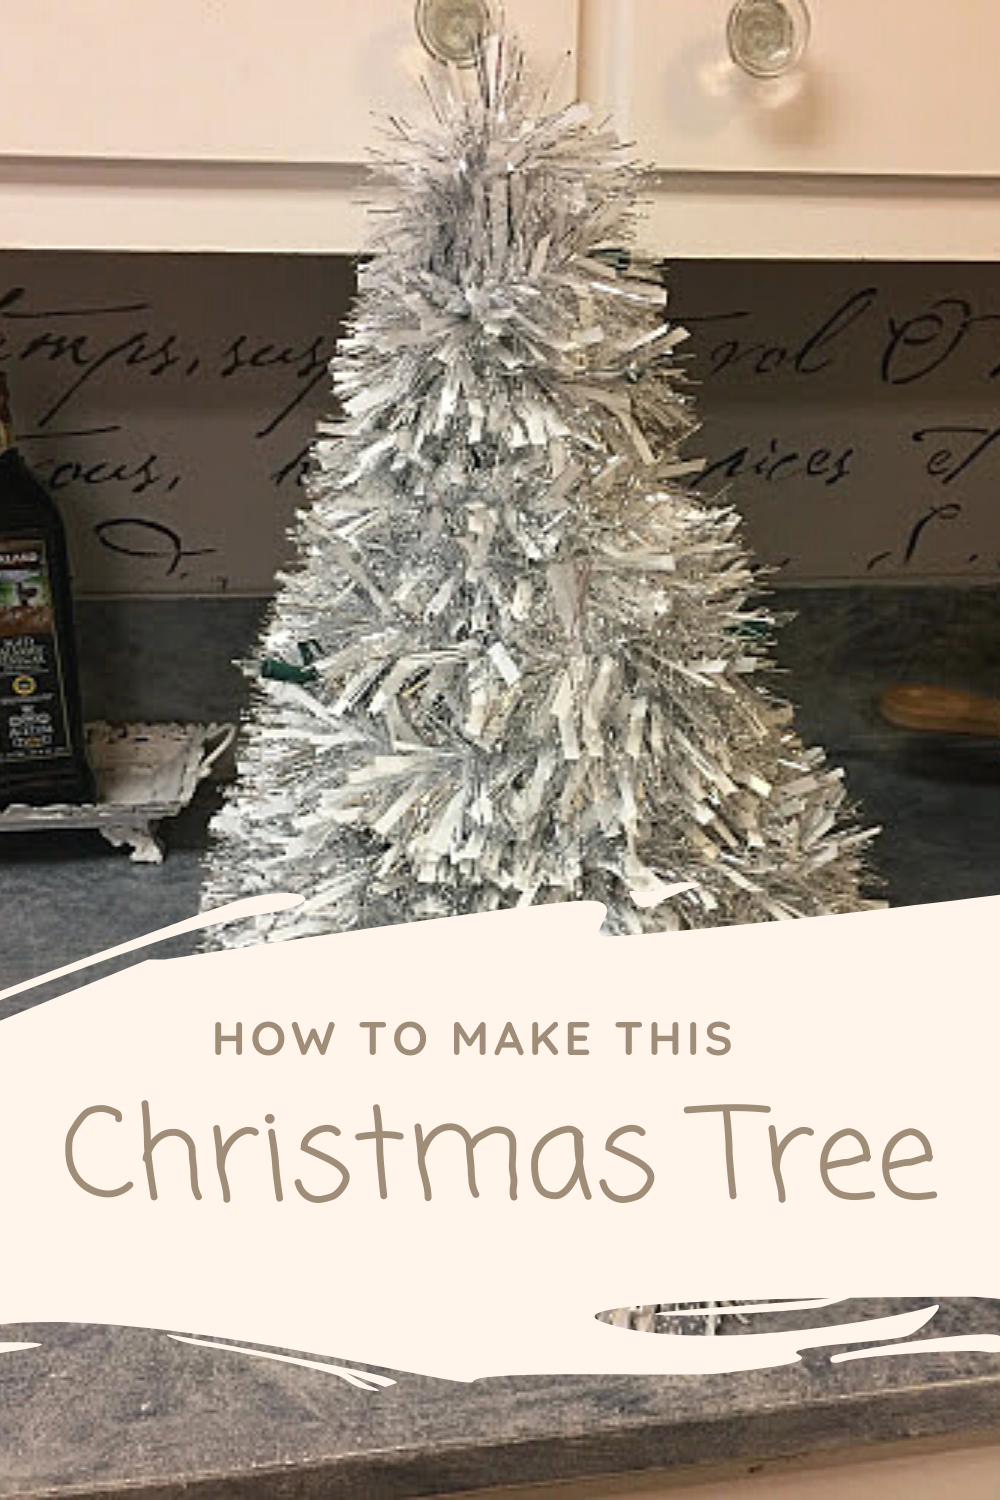 Down Sprigg Lane: Make A Christmas Tree with Tinsel and Wire Hangers